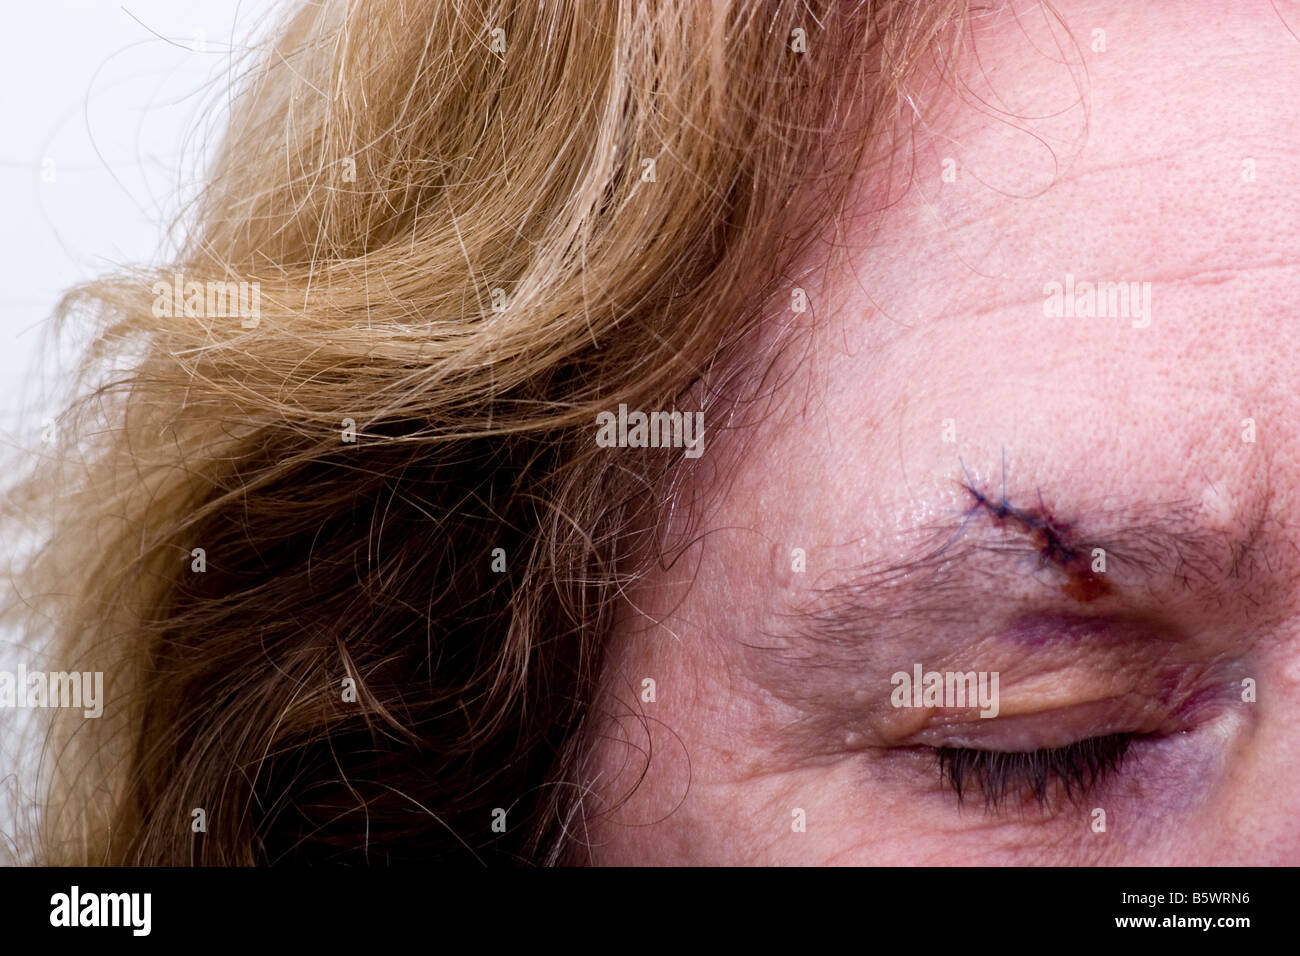 A senior woman with a sutured cut over her eye Stock Photo